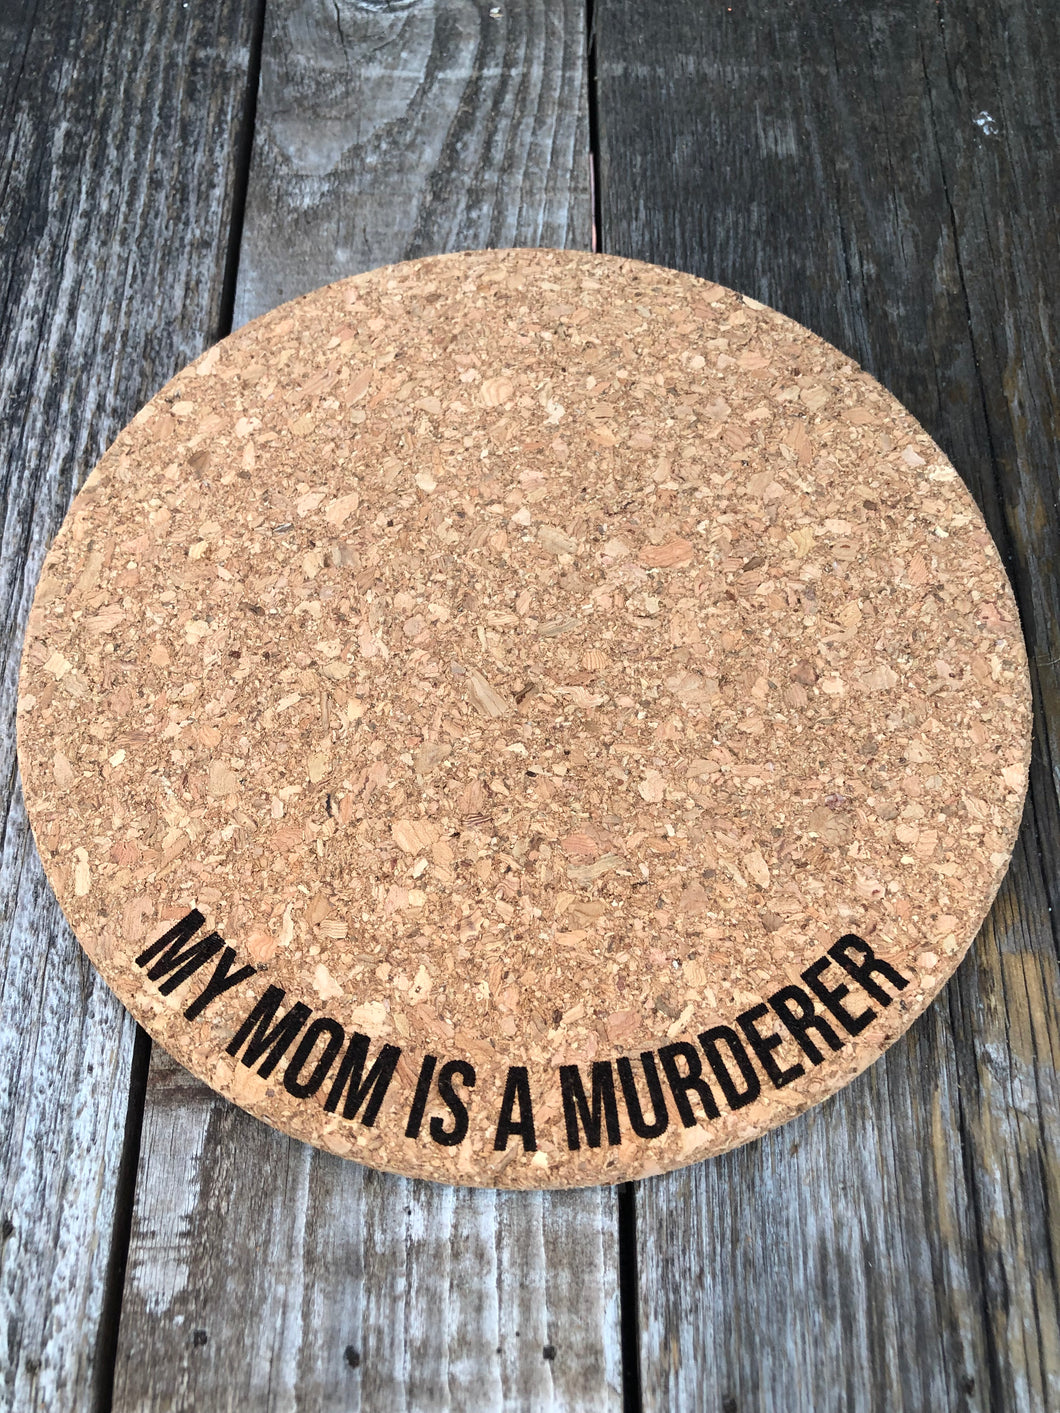 My Mom is a Murderer Cork Plant Mat - Engraved Cork Round - Cork Bottom - No Plastic or Rubber - All Natural Material